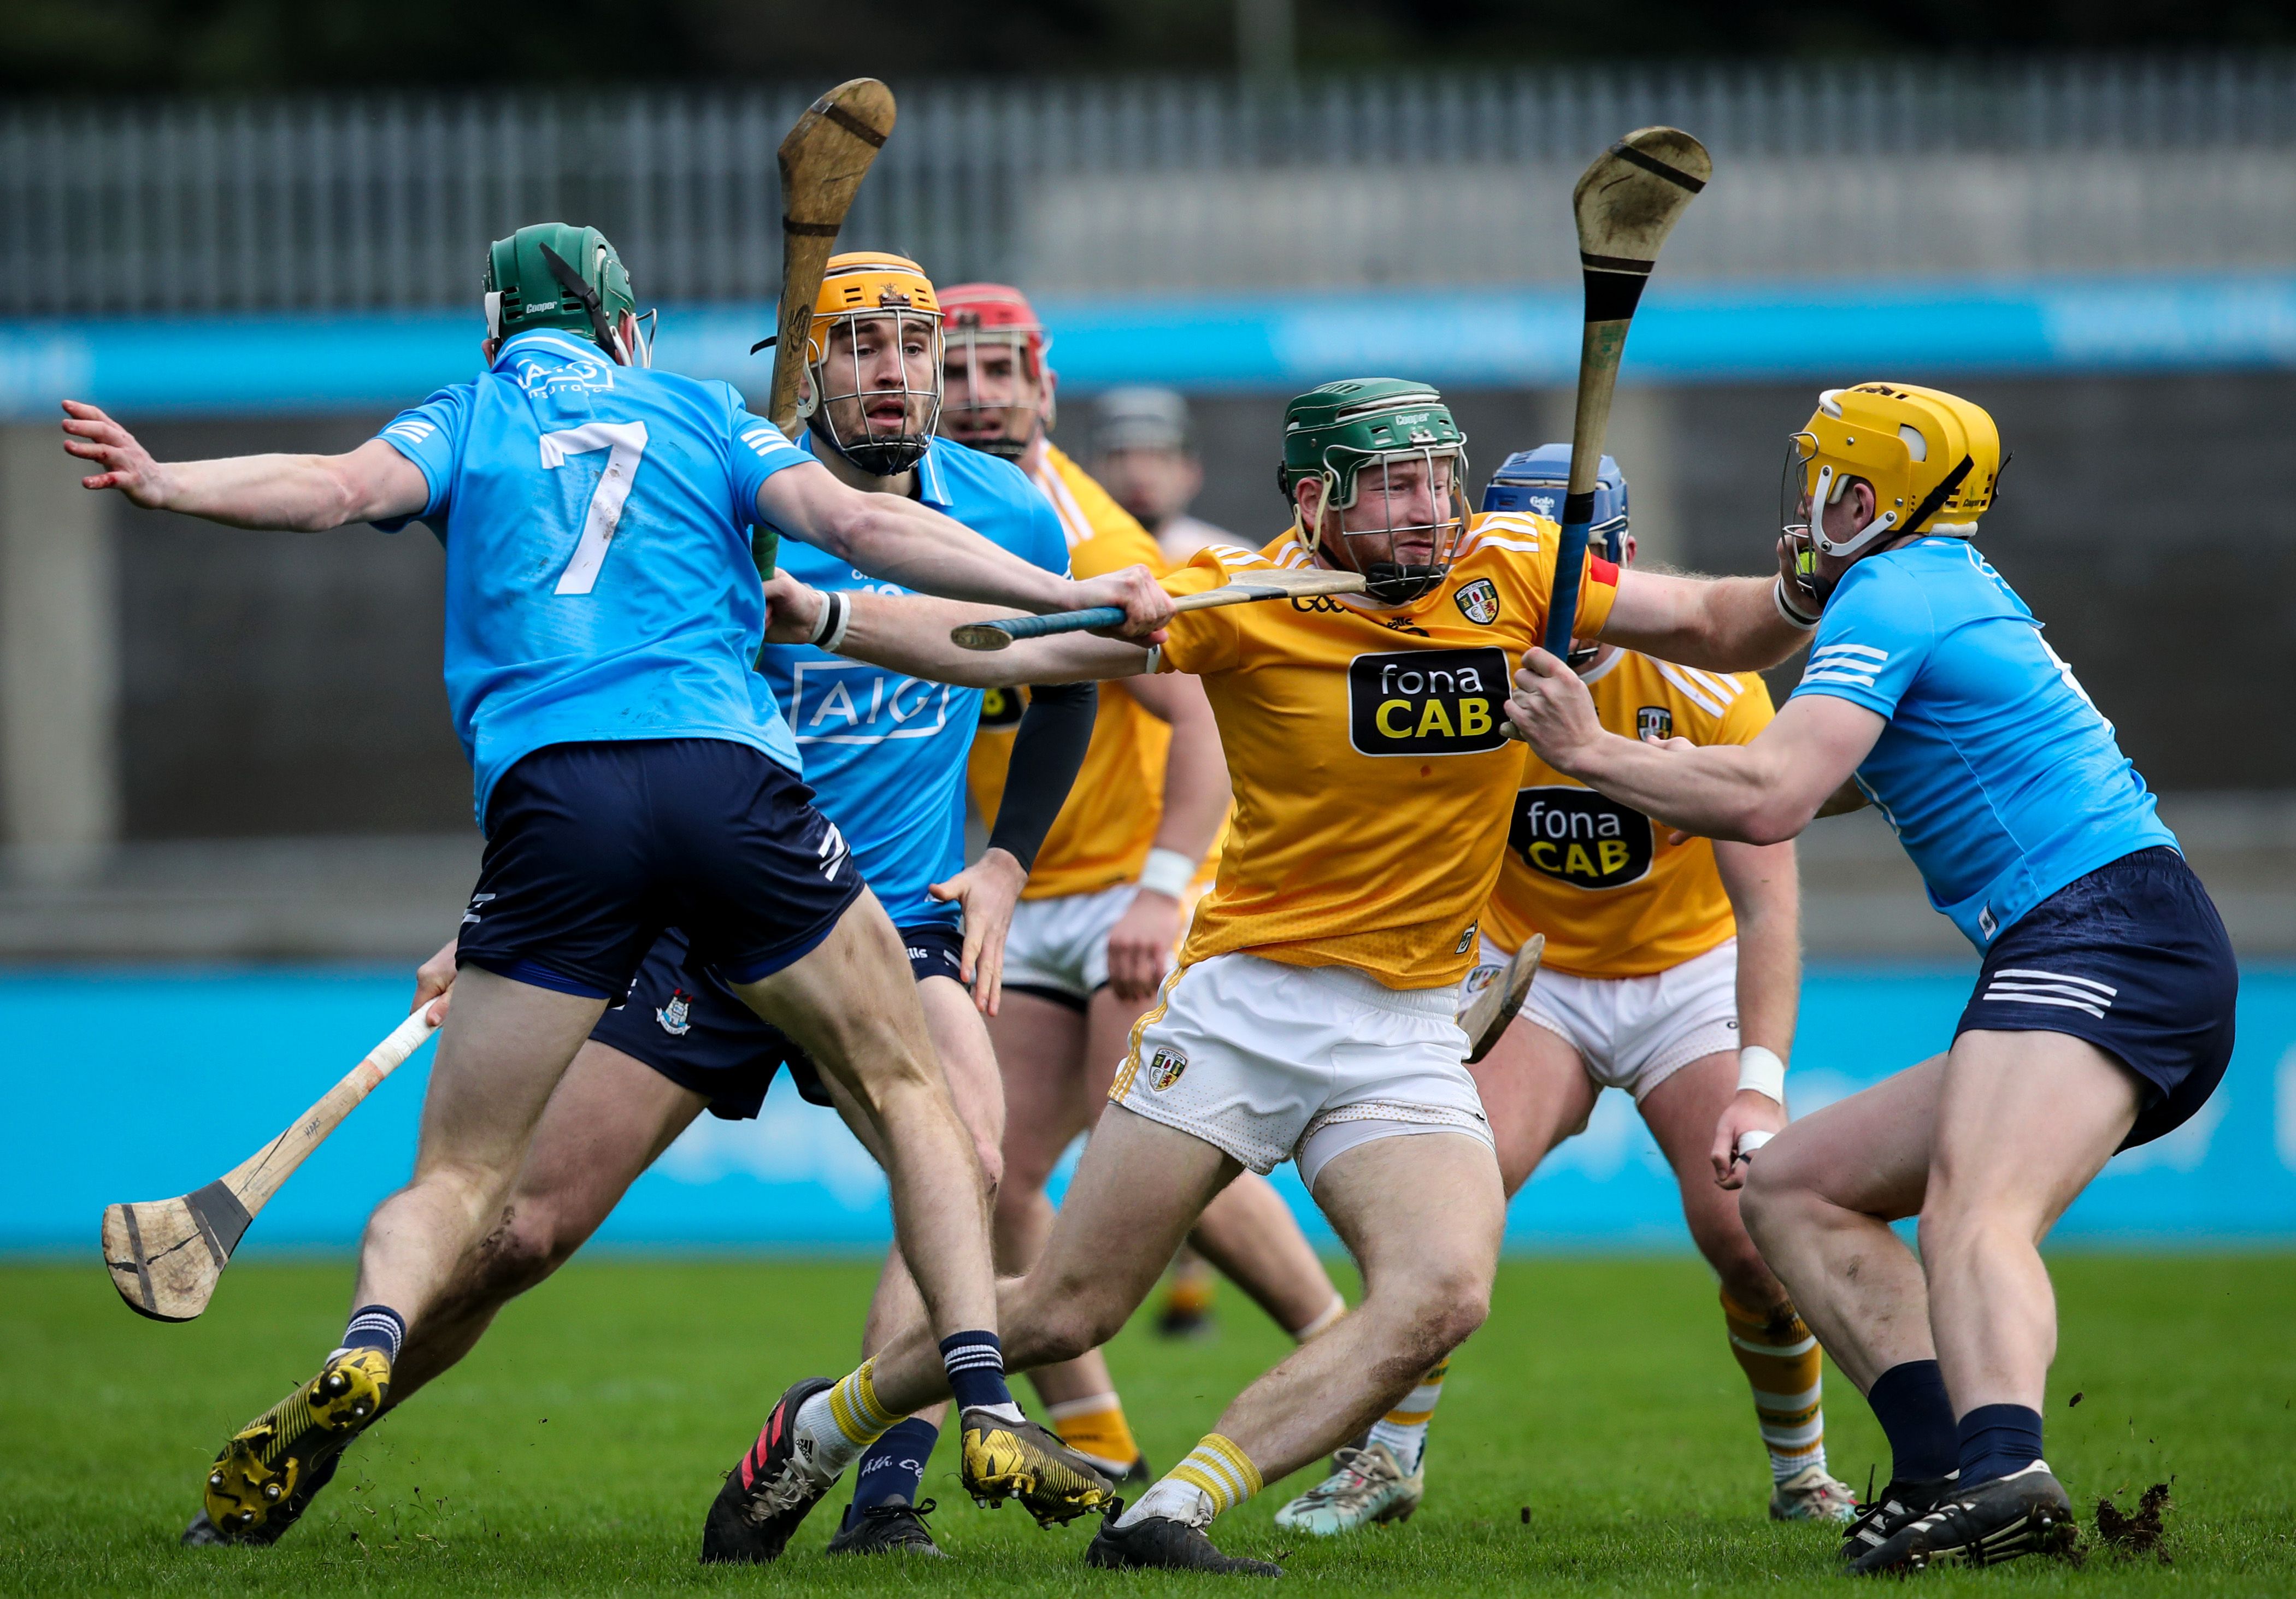 Niall McKenna tries to break through a wall of blue jerseys at Parnell Park on Sunday 